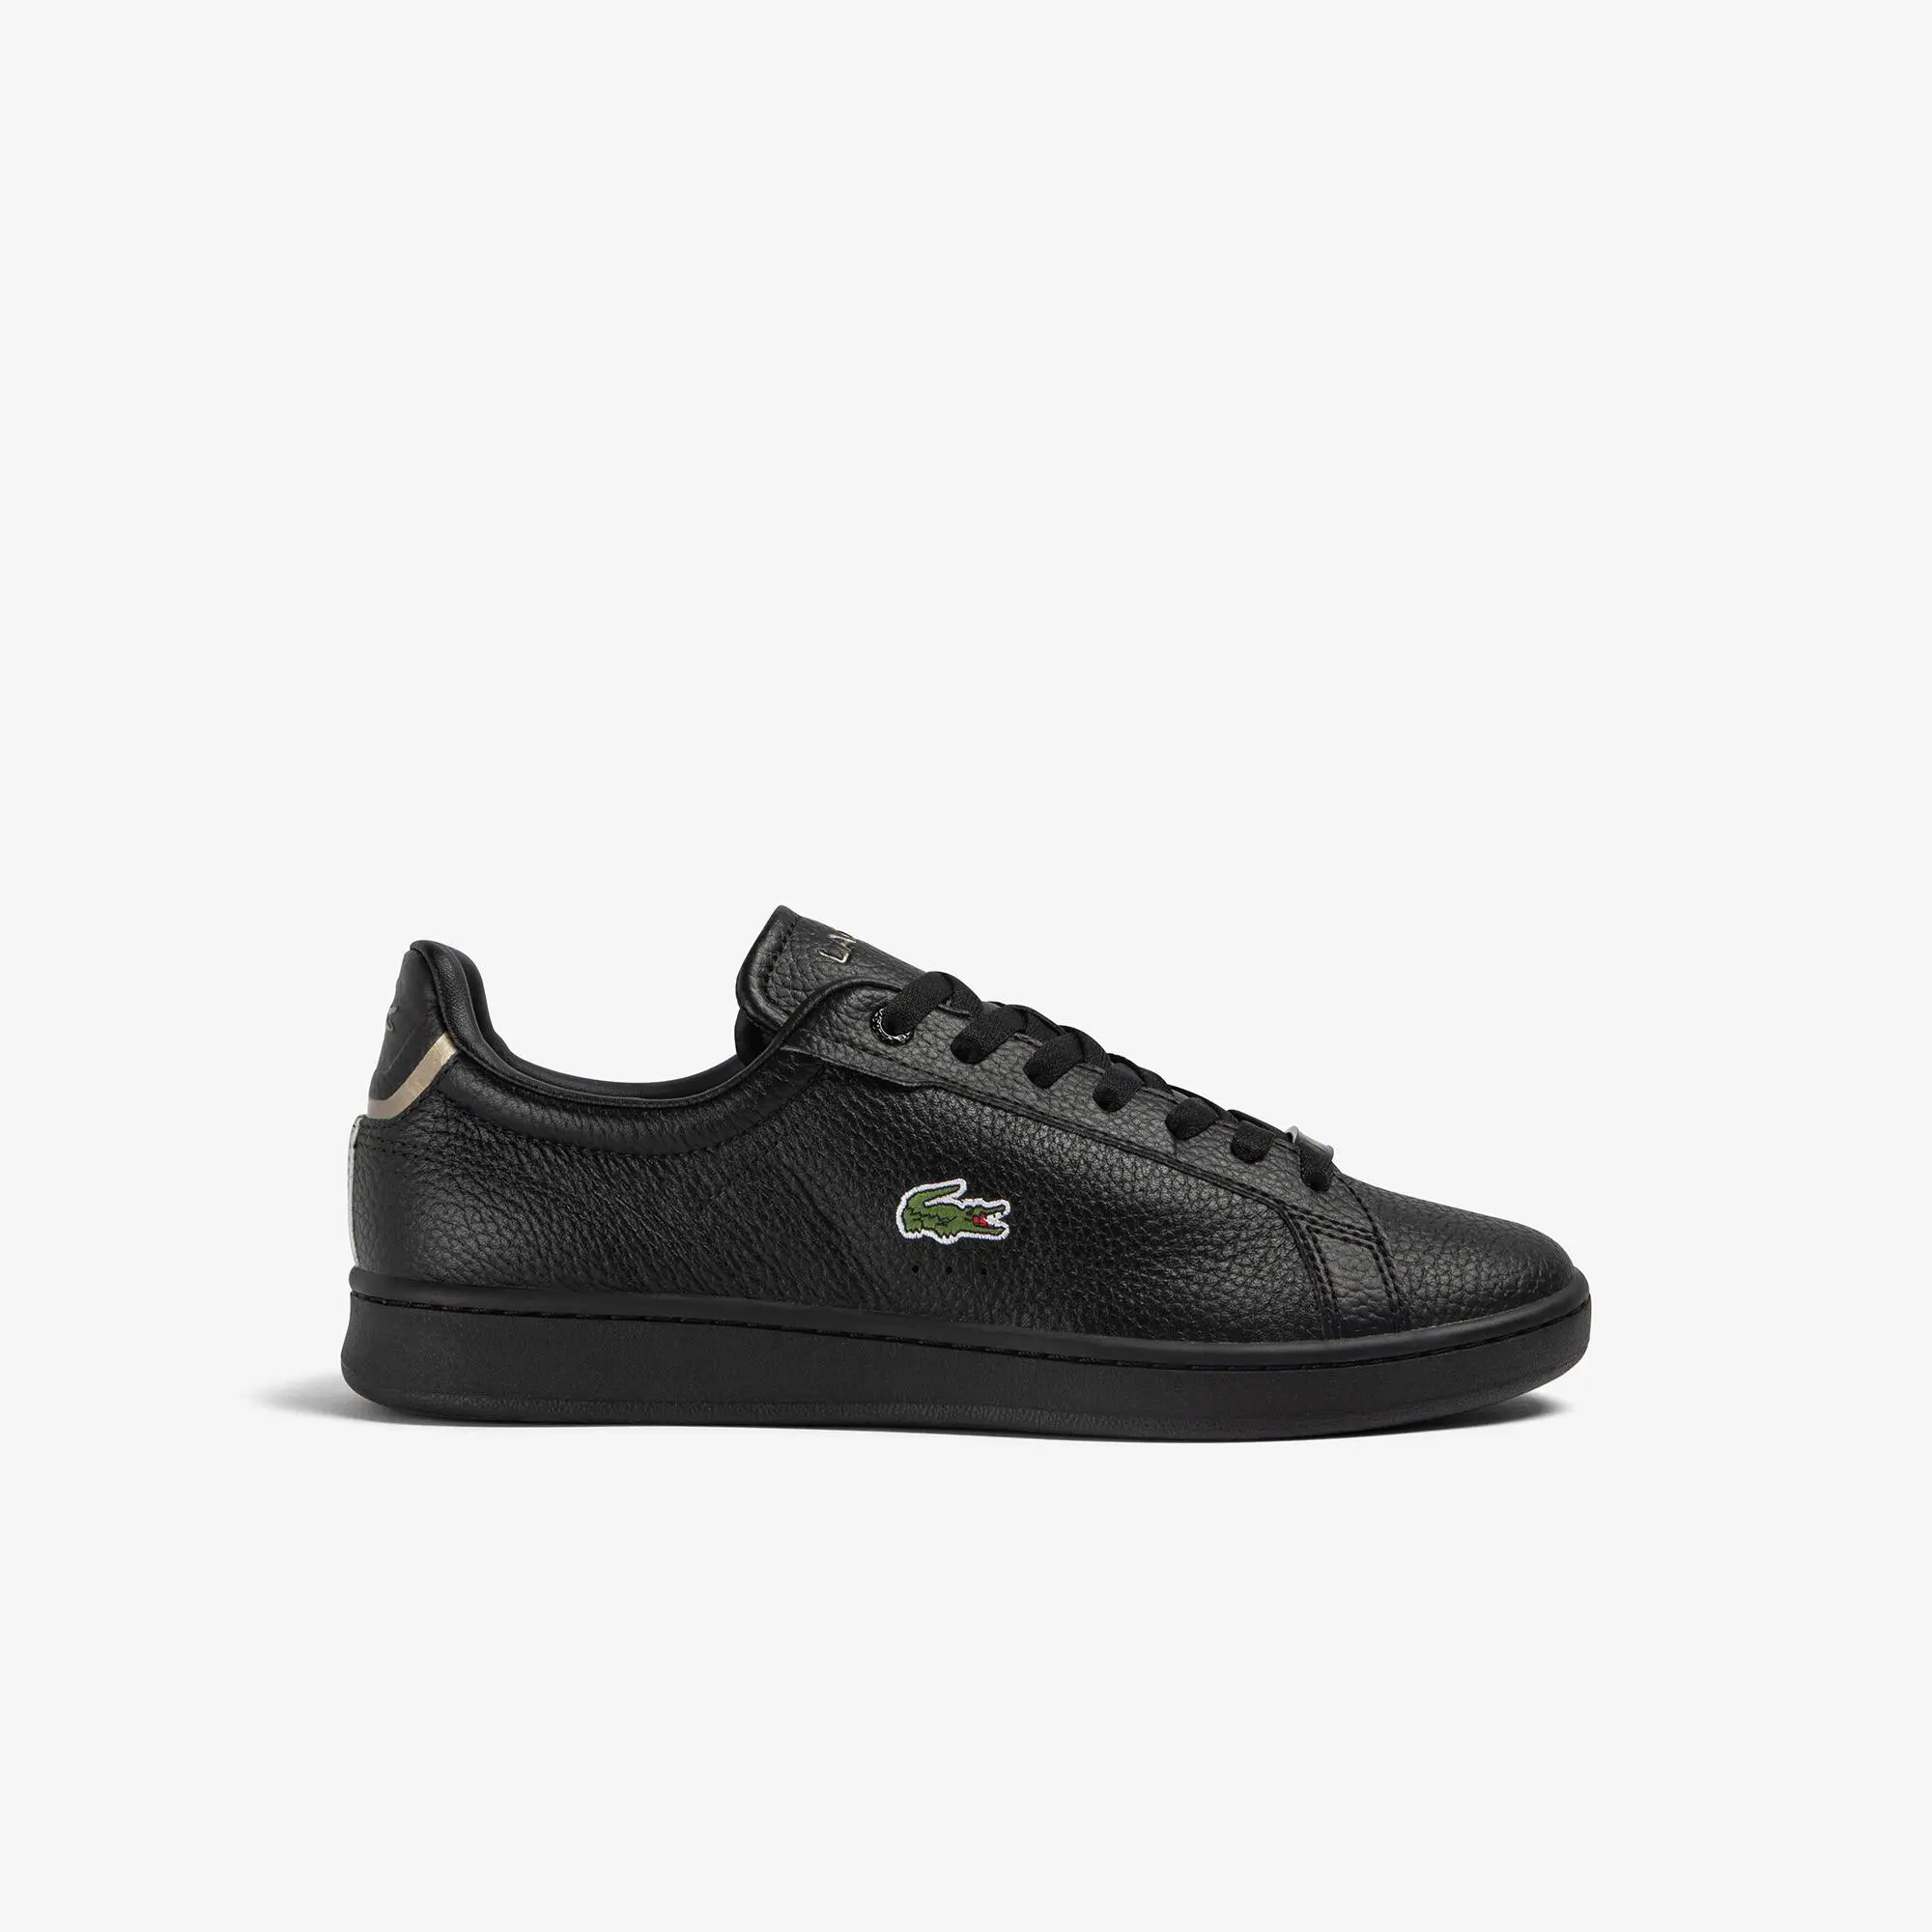 Lacoste Men's Carnaby Pro Leather Sneakers. 1